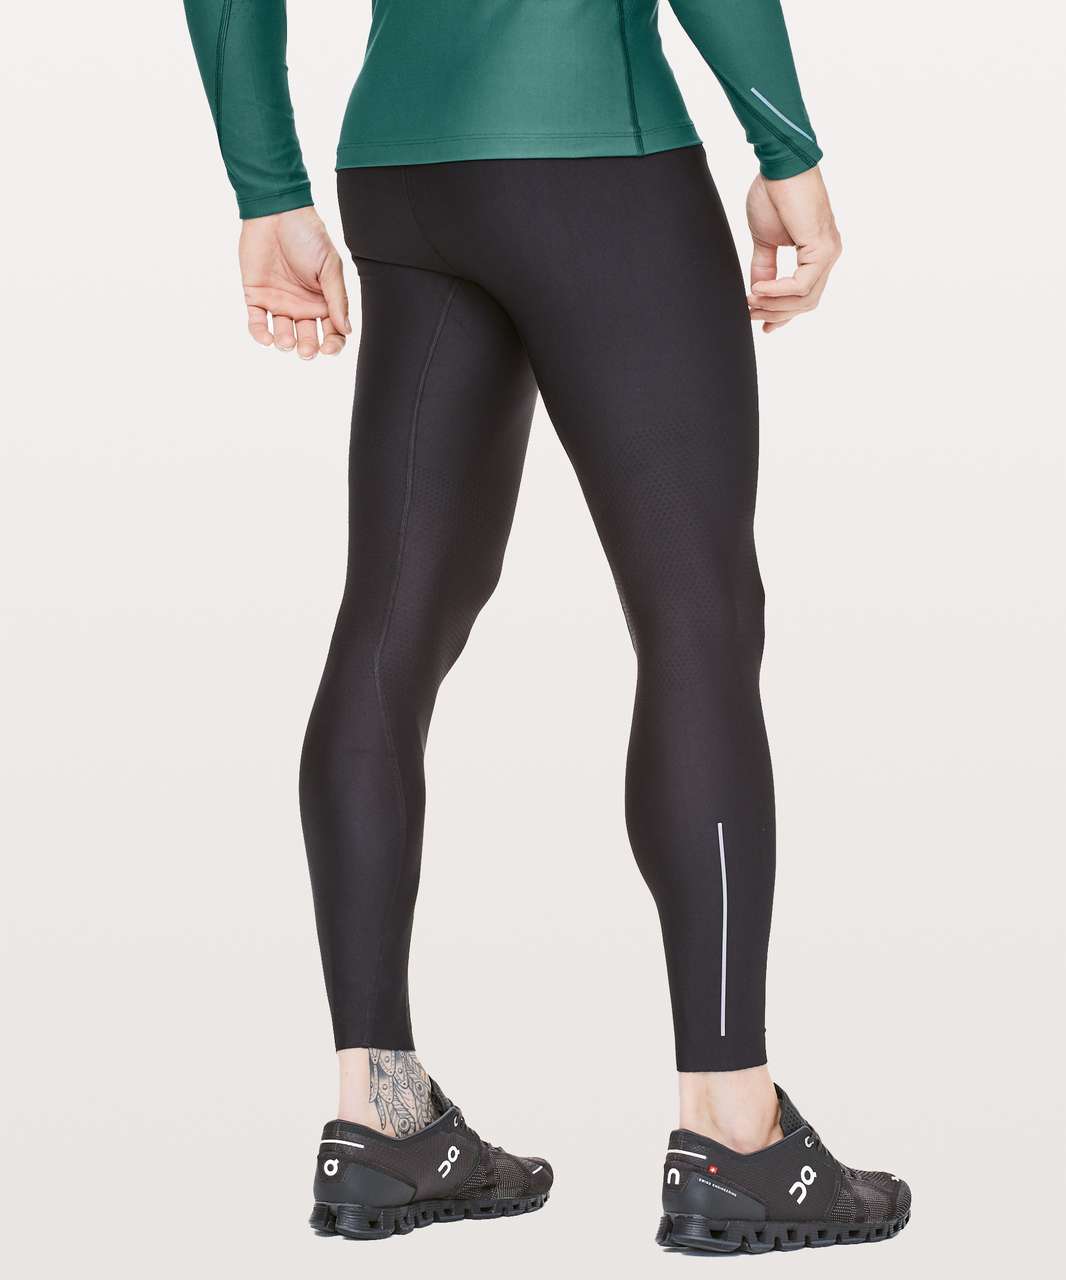 lululemon mens tights review